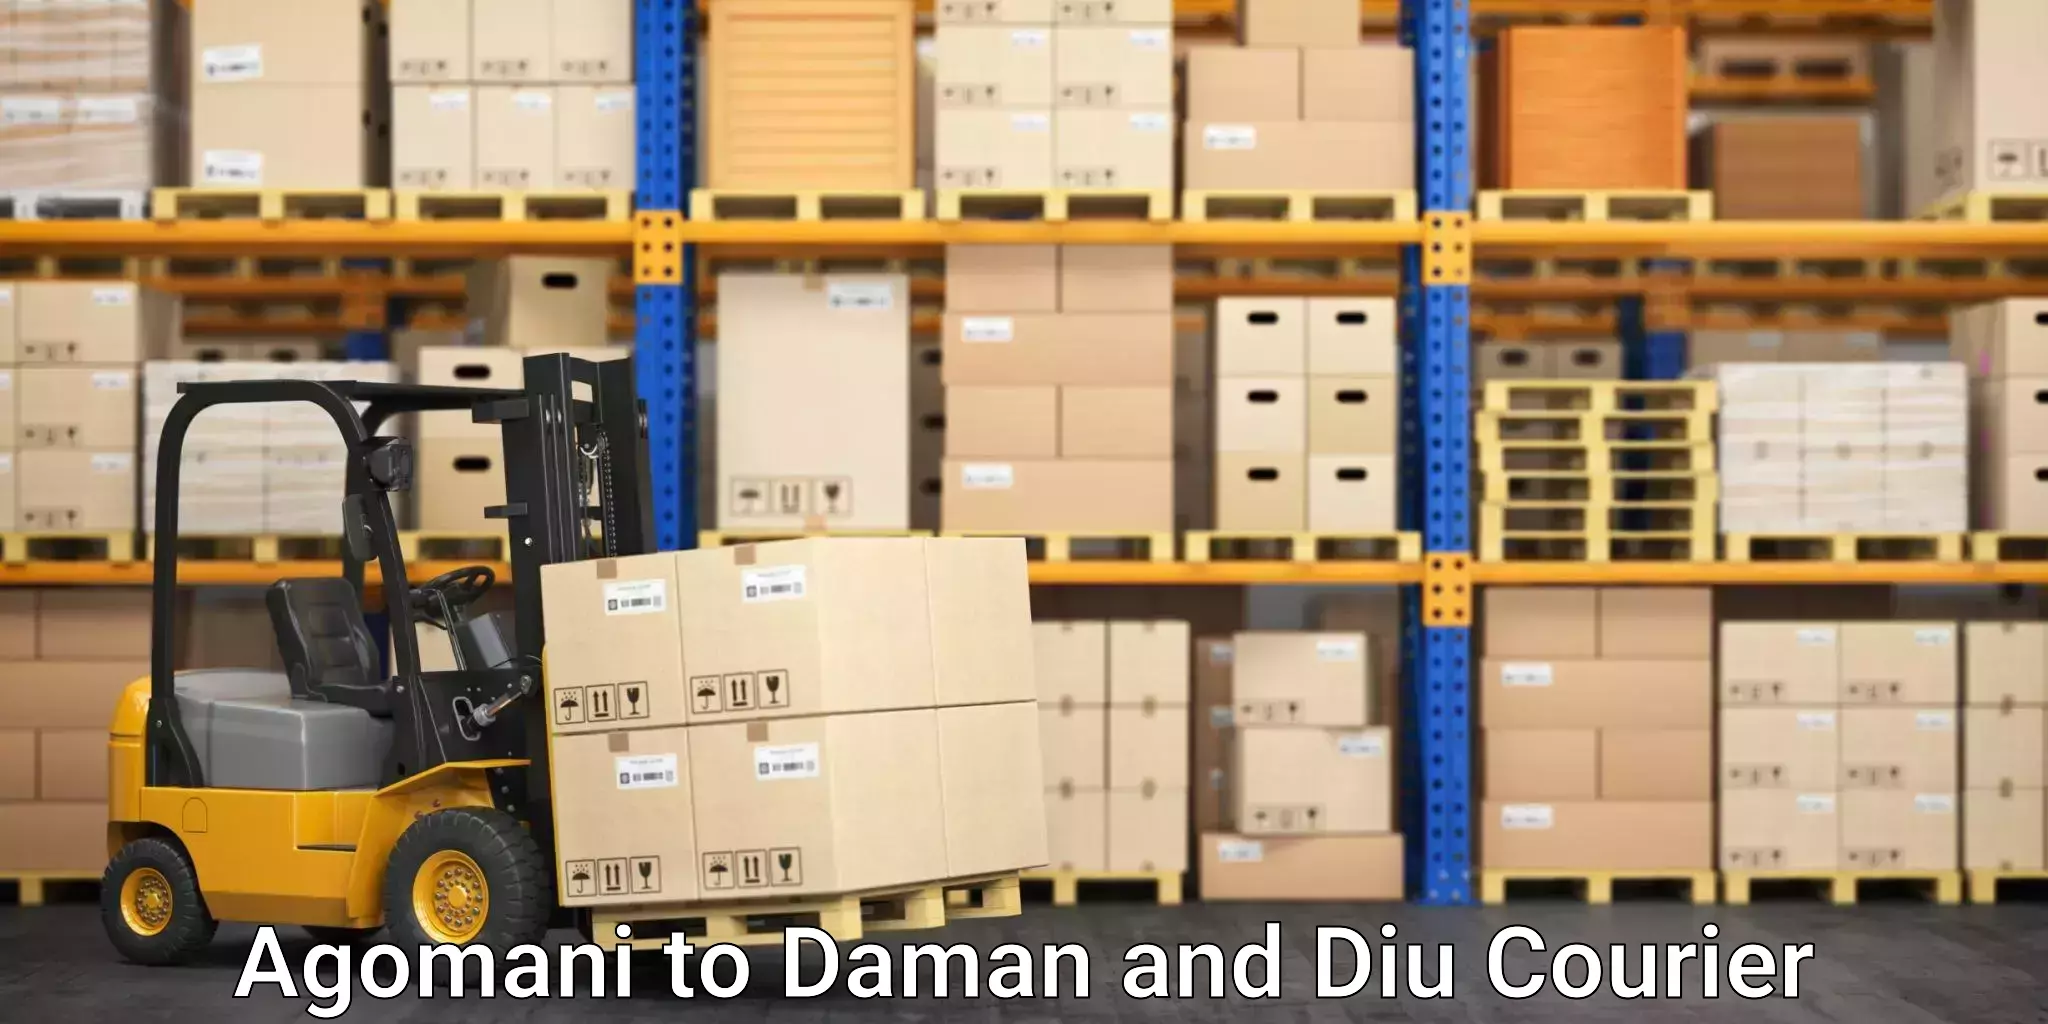 Business delivery service Agomani to Daman and Diu